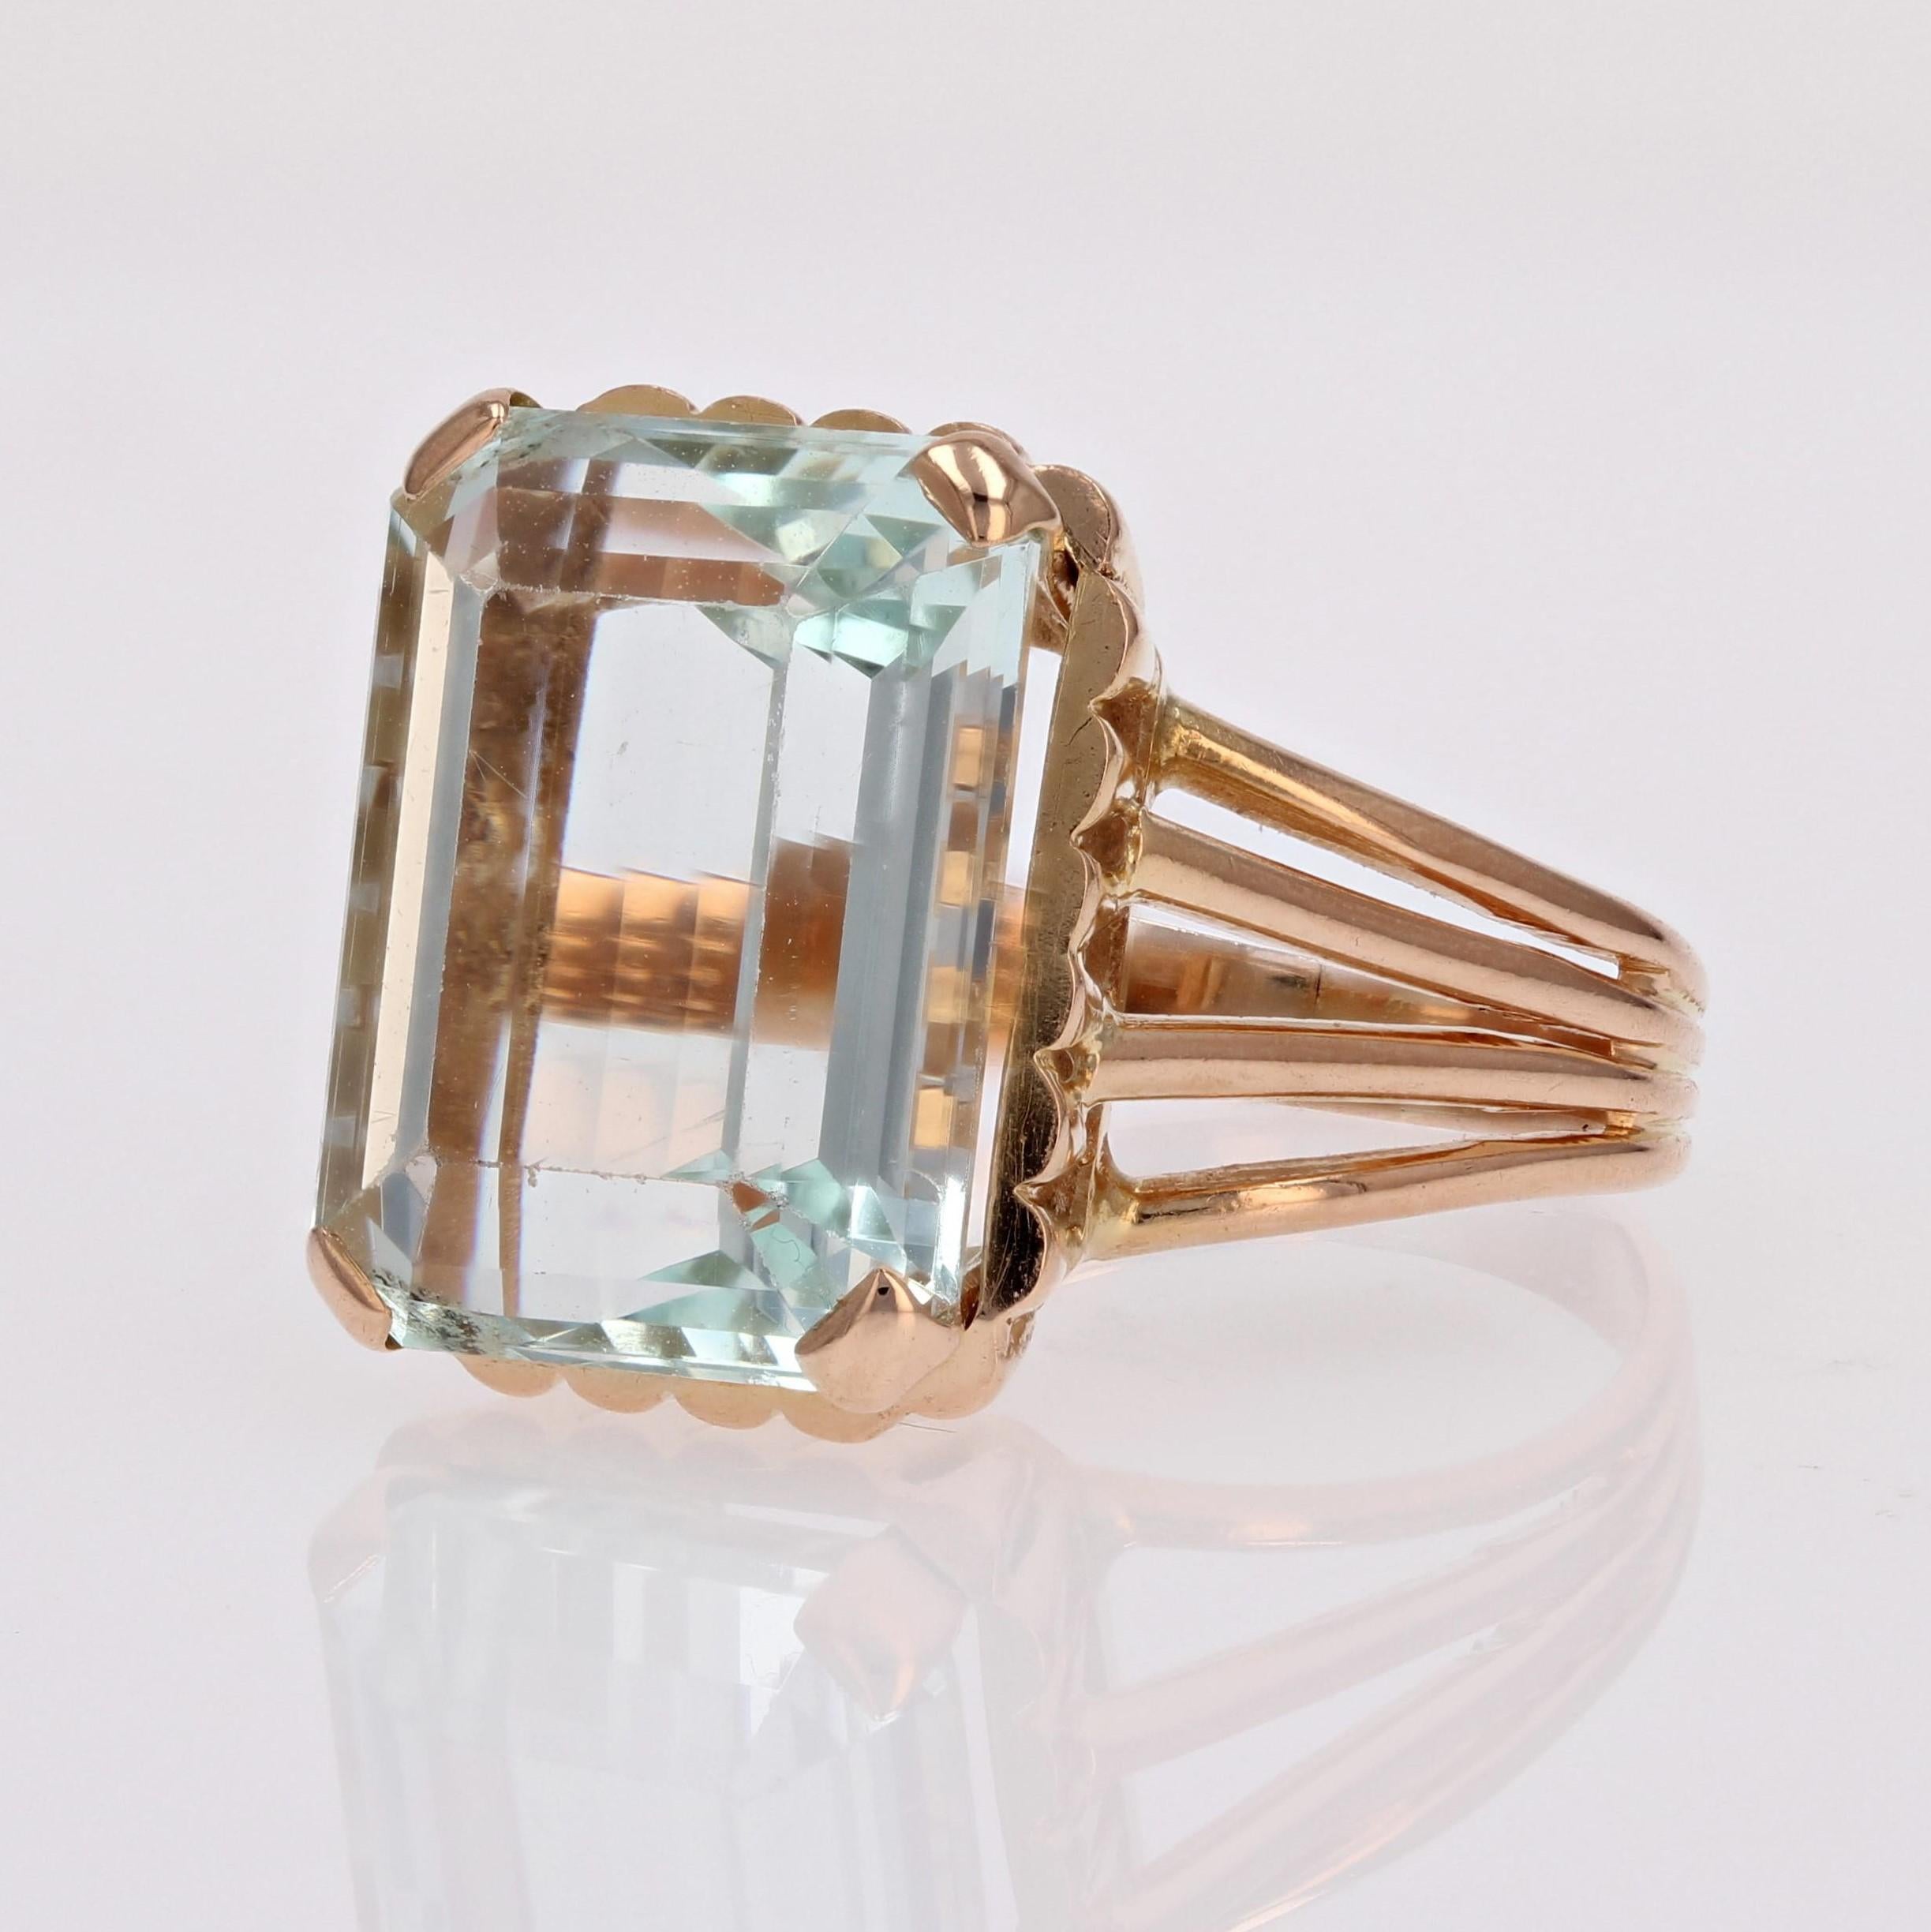 French 1960s 9.80 Carats Aquamarine 18 Karat Rose Gold Cocktail Ring For Sale 2